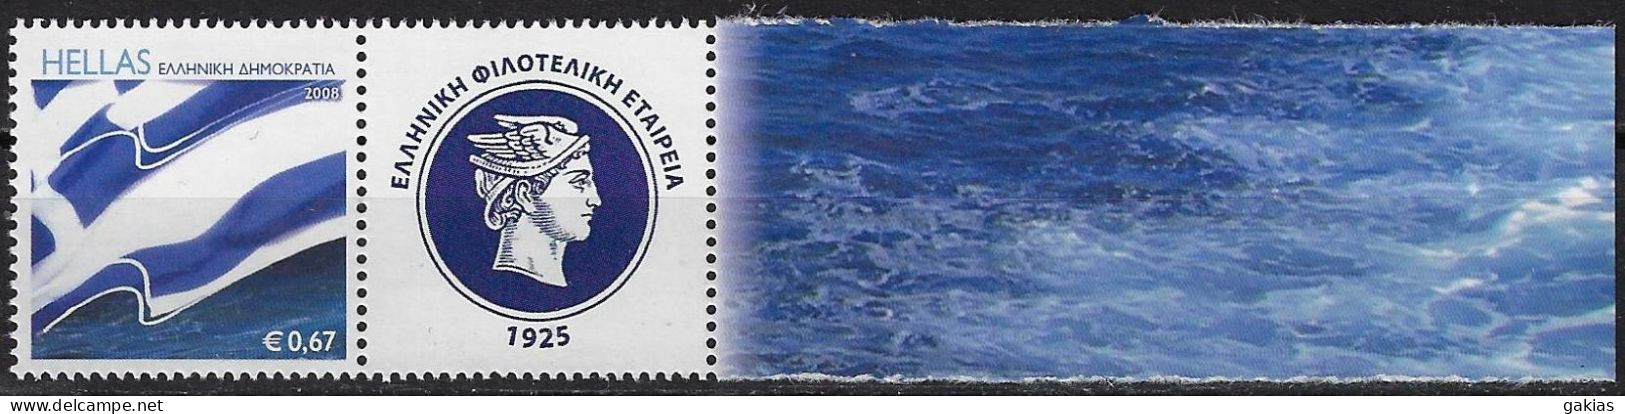 GREECE 2021, 2 Uprated Personalised Stamps, 1 With WORLD POST DAY Label And 1 With Label, MNH/**, RRR!!! - Ungebraucht